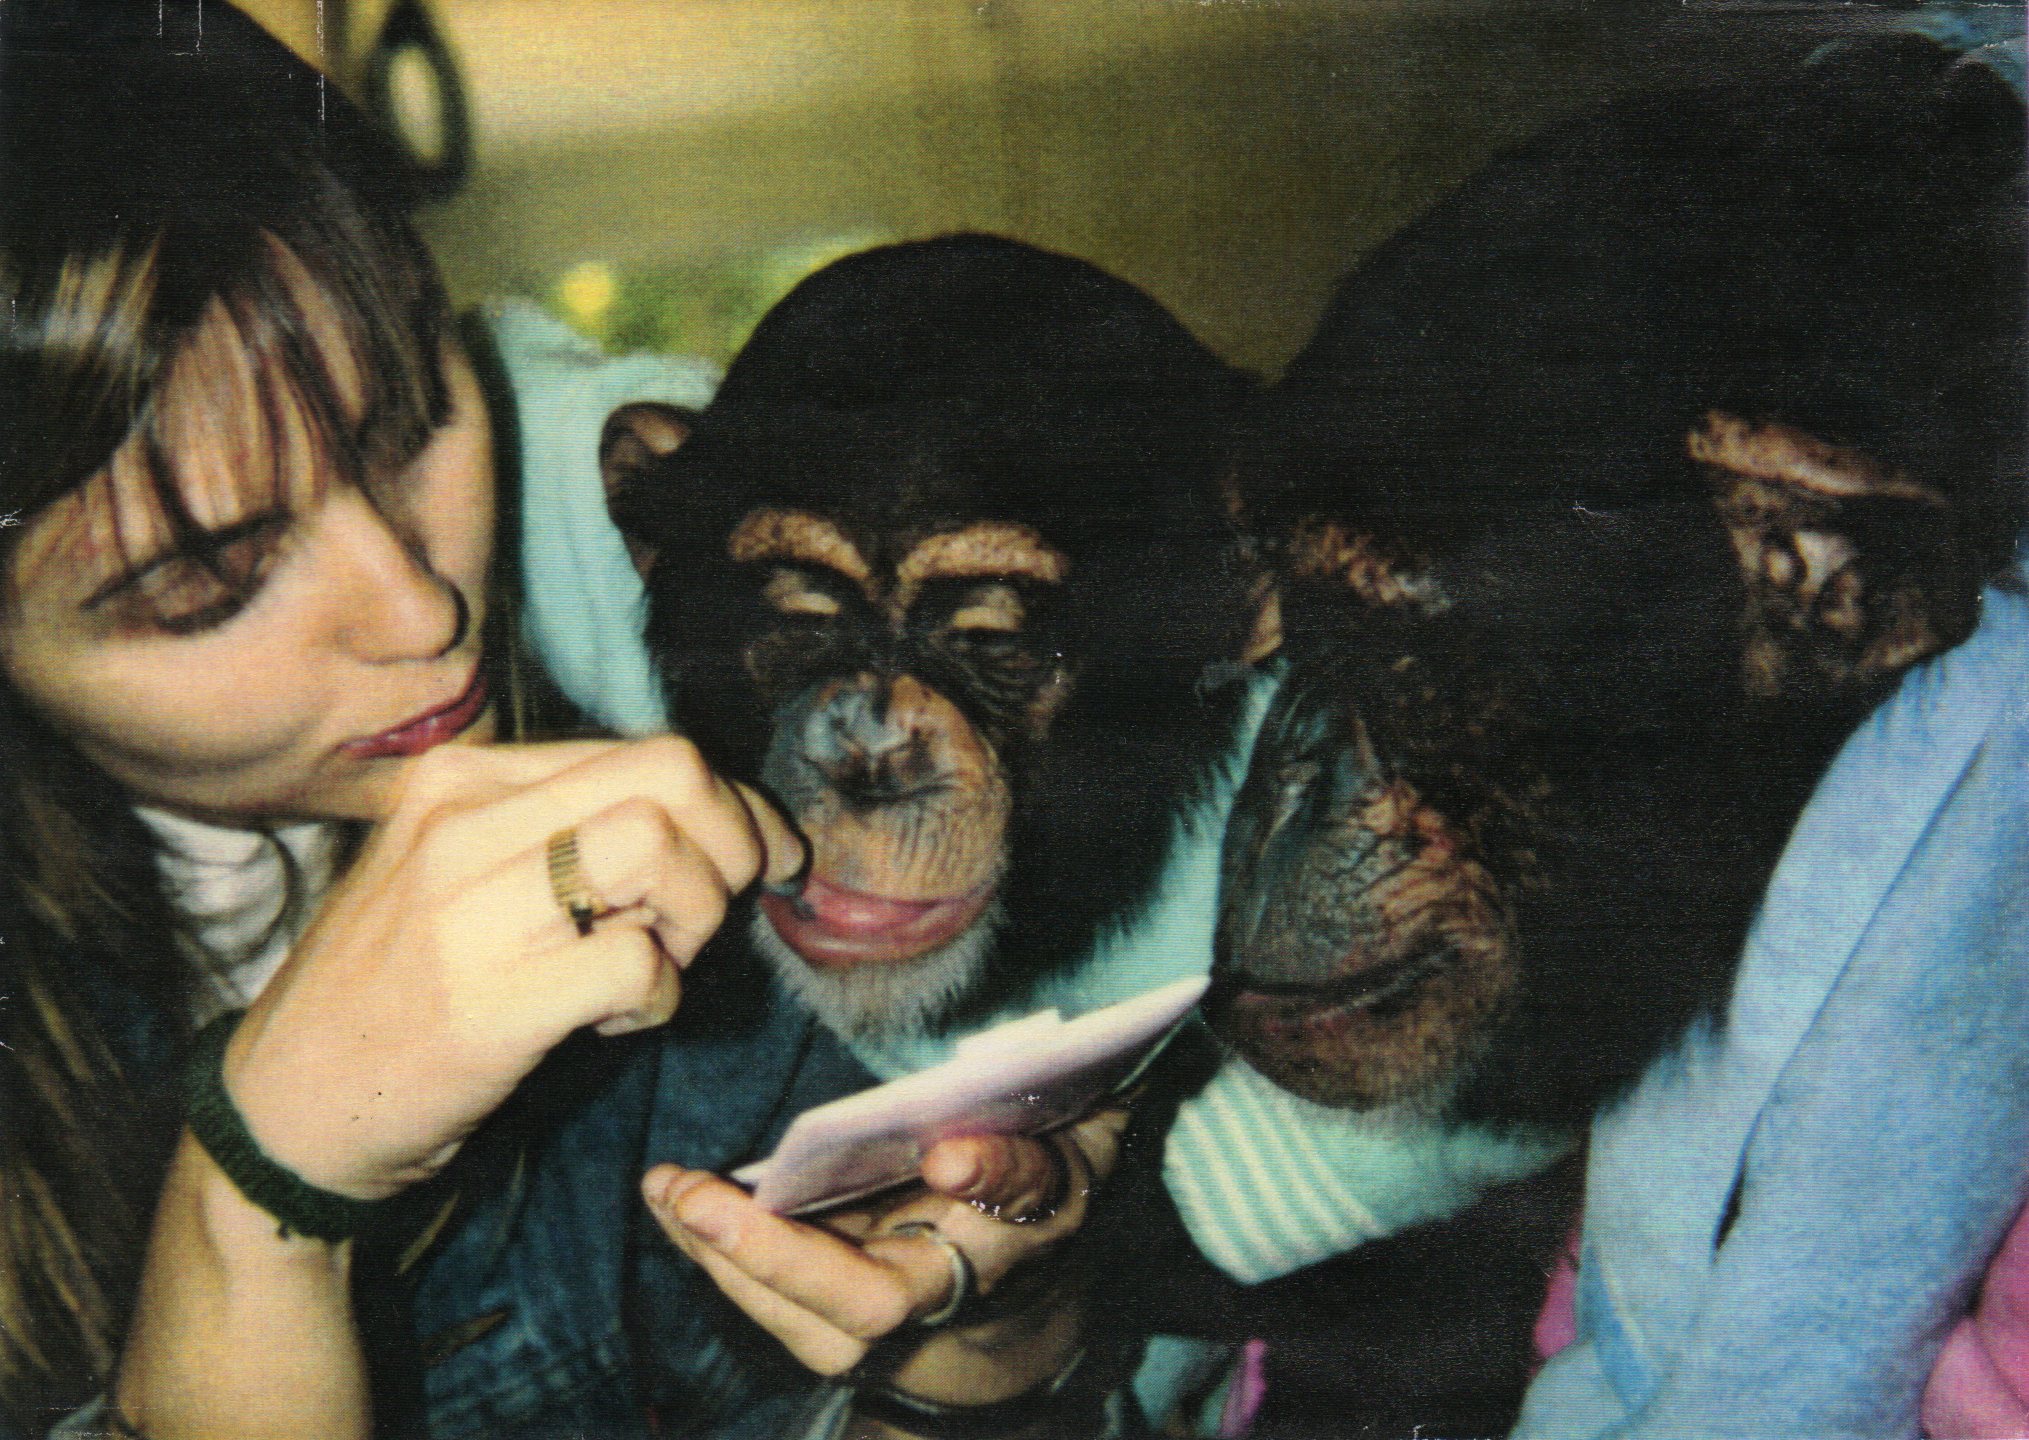 FILMING LIVING WITH CHIMPANZEES